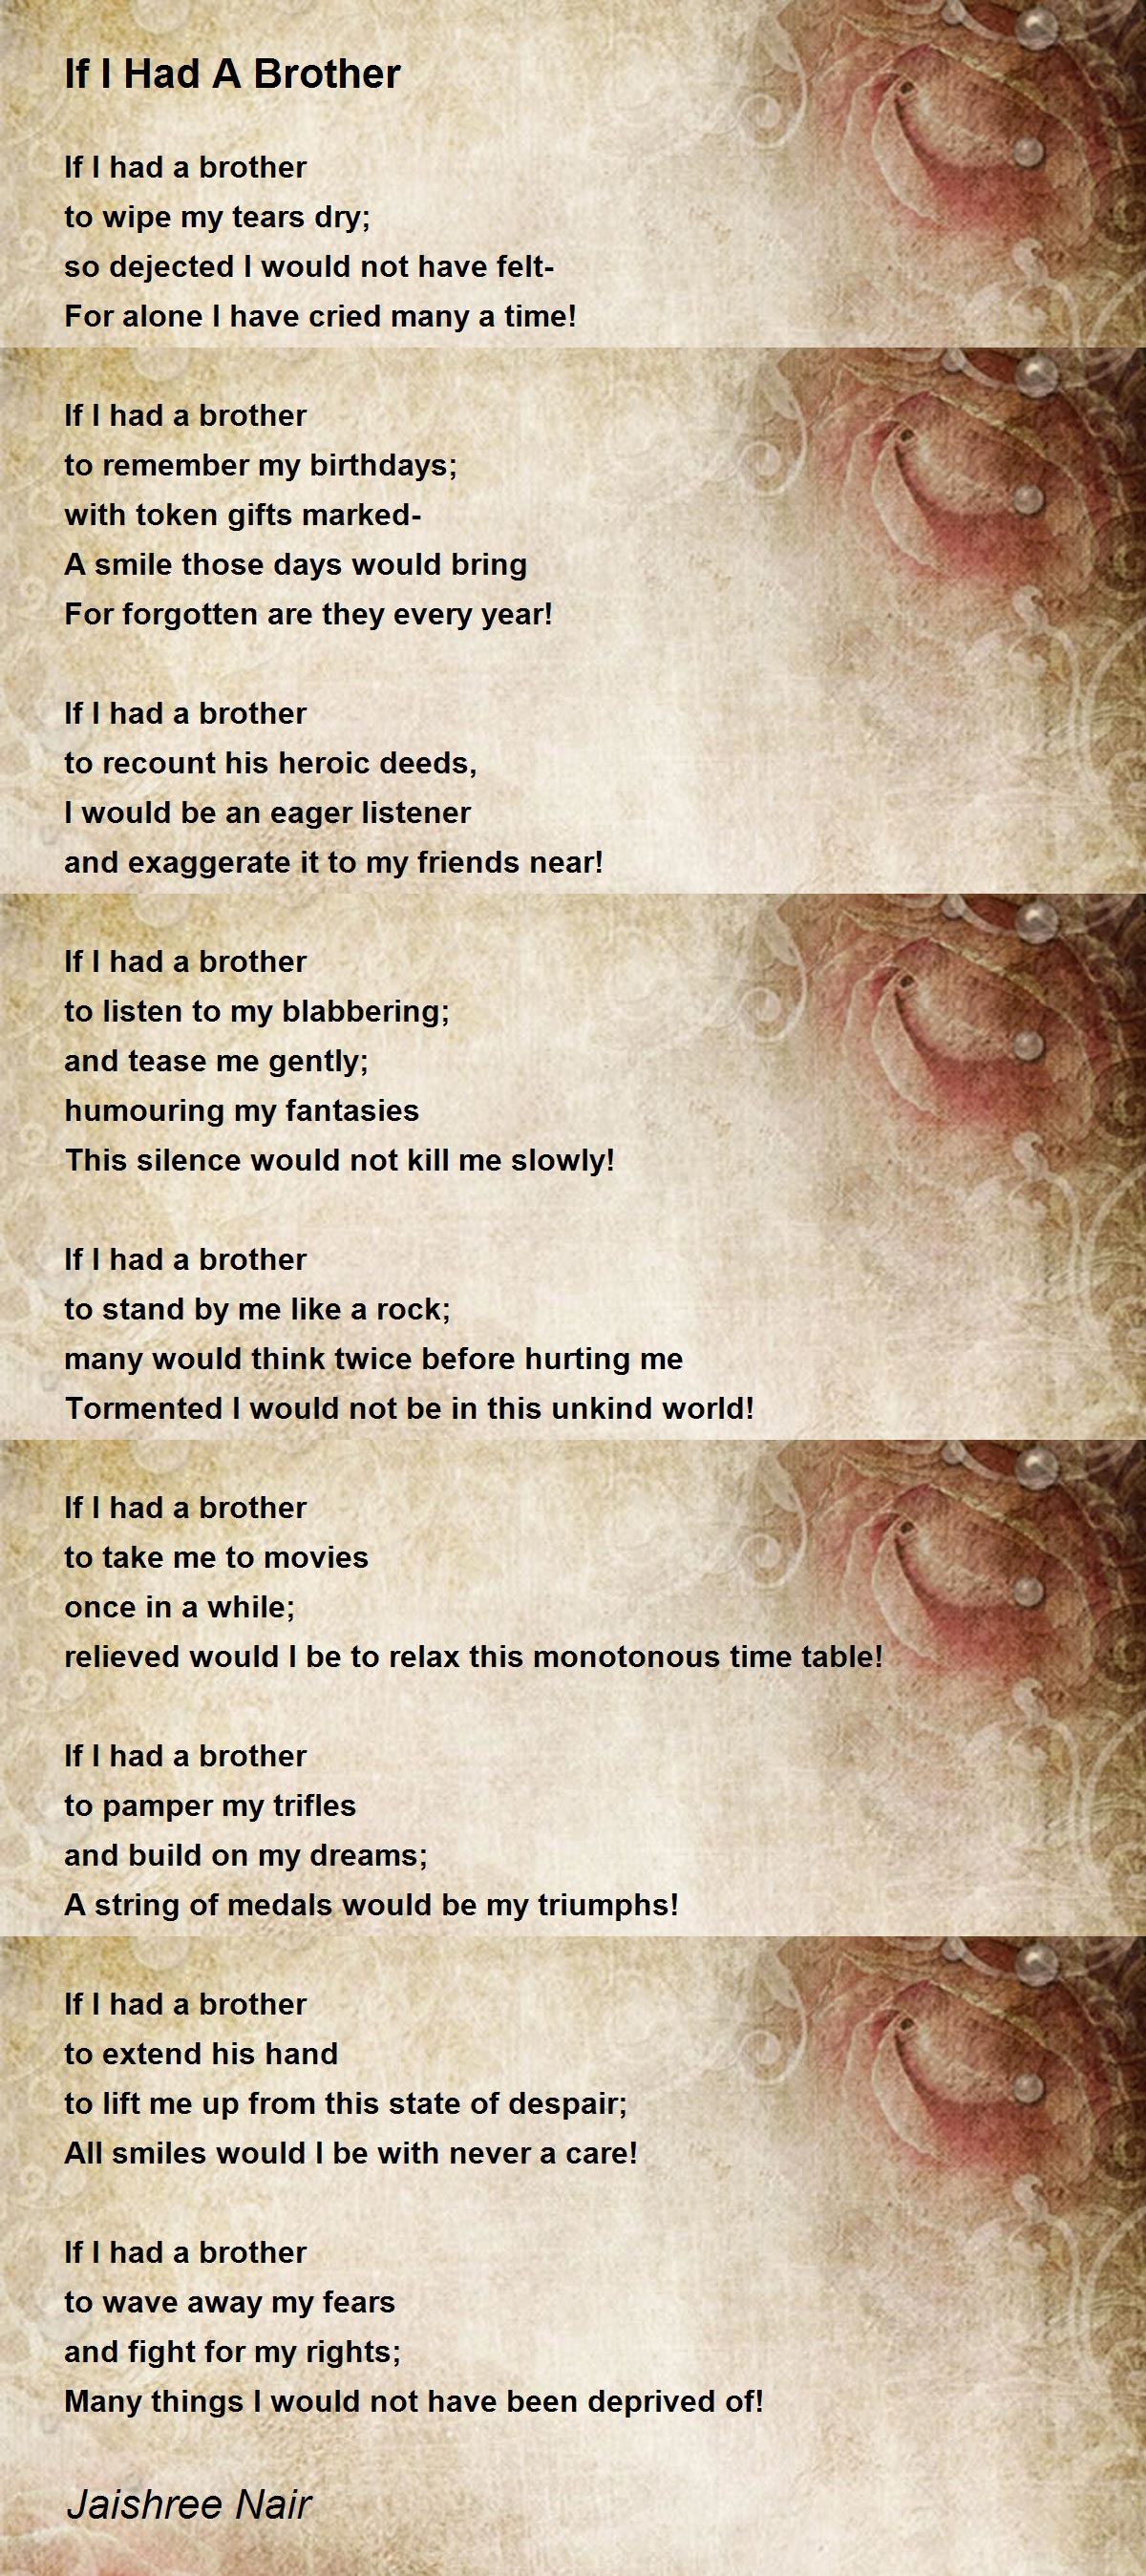 If I Had A Brother - If I Had A Brother Poem by Jaishree Nair